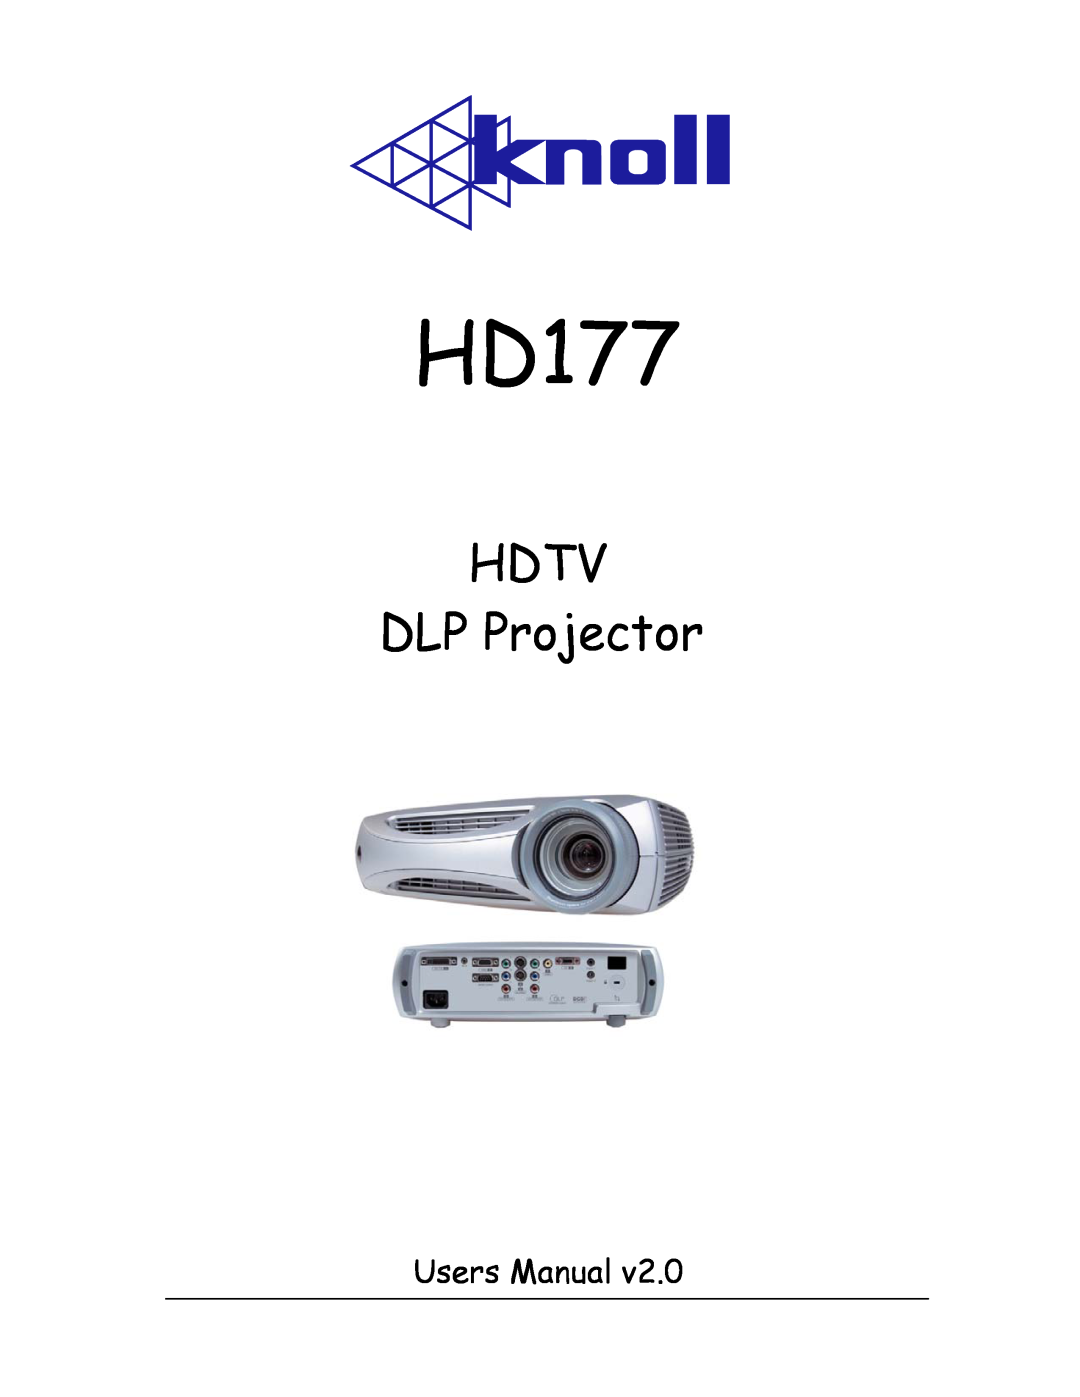 Knoll Systems HD177 user manual HDTV DLP Projector, Users Manual 